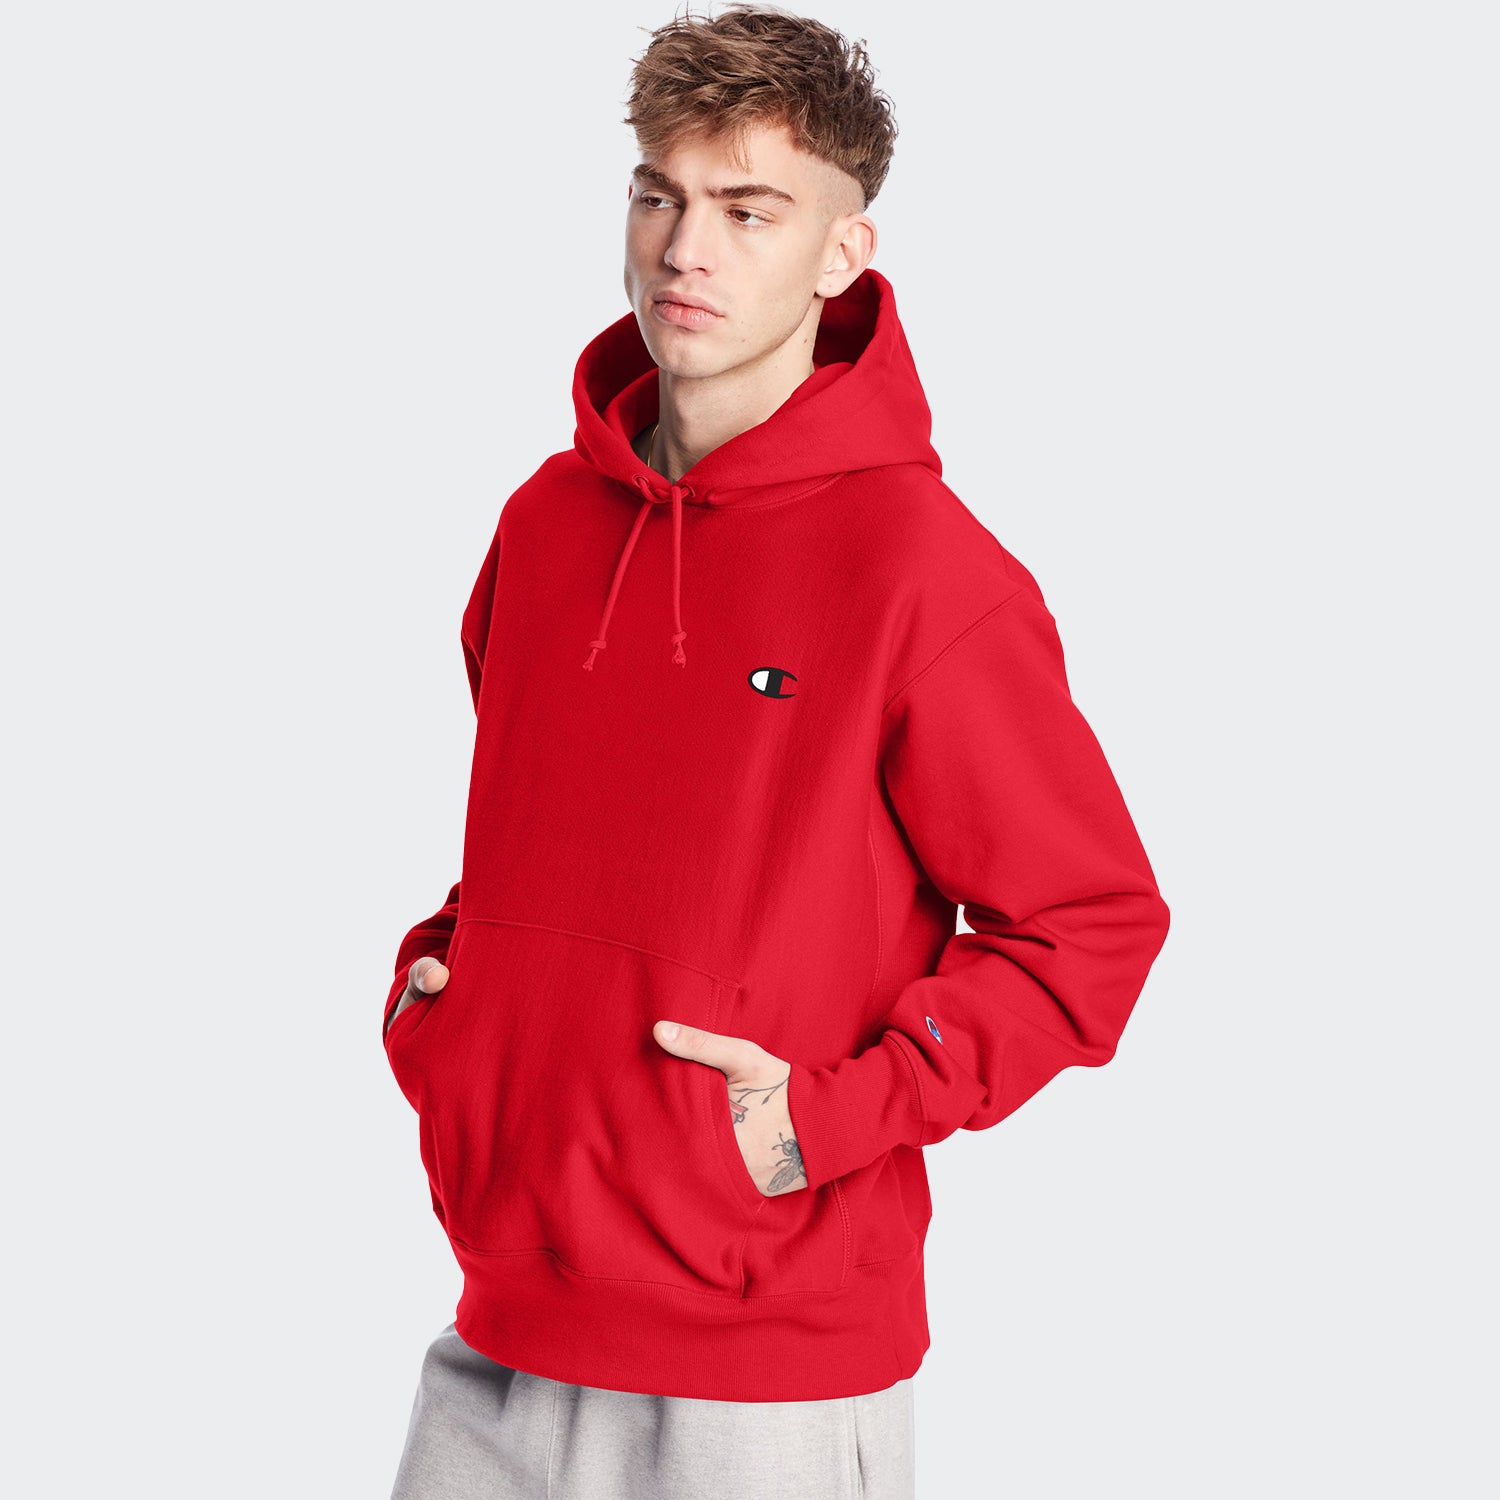 Champion Men's Life Reverse Weave Pullover Hoodie, Red, L